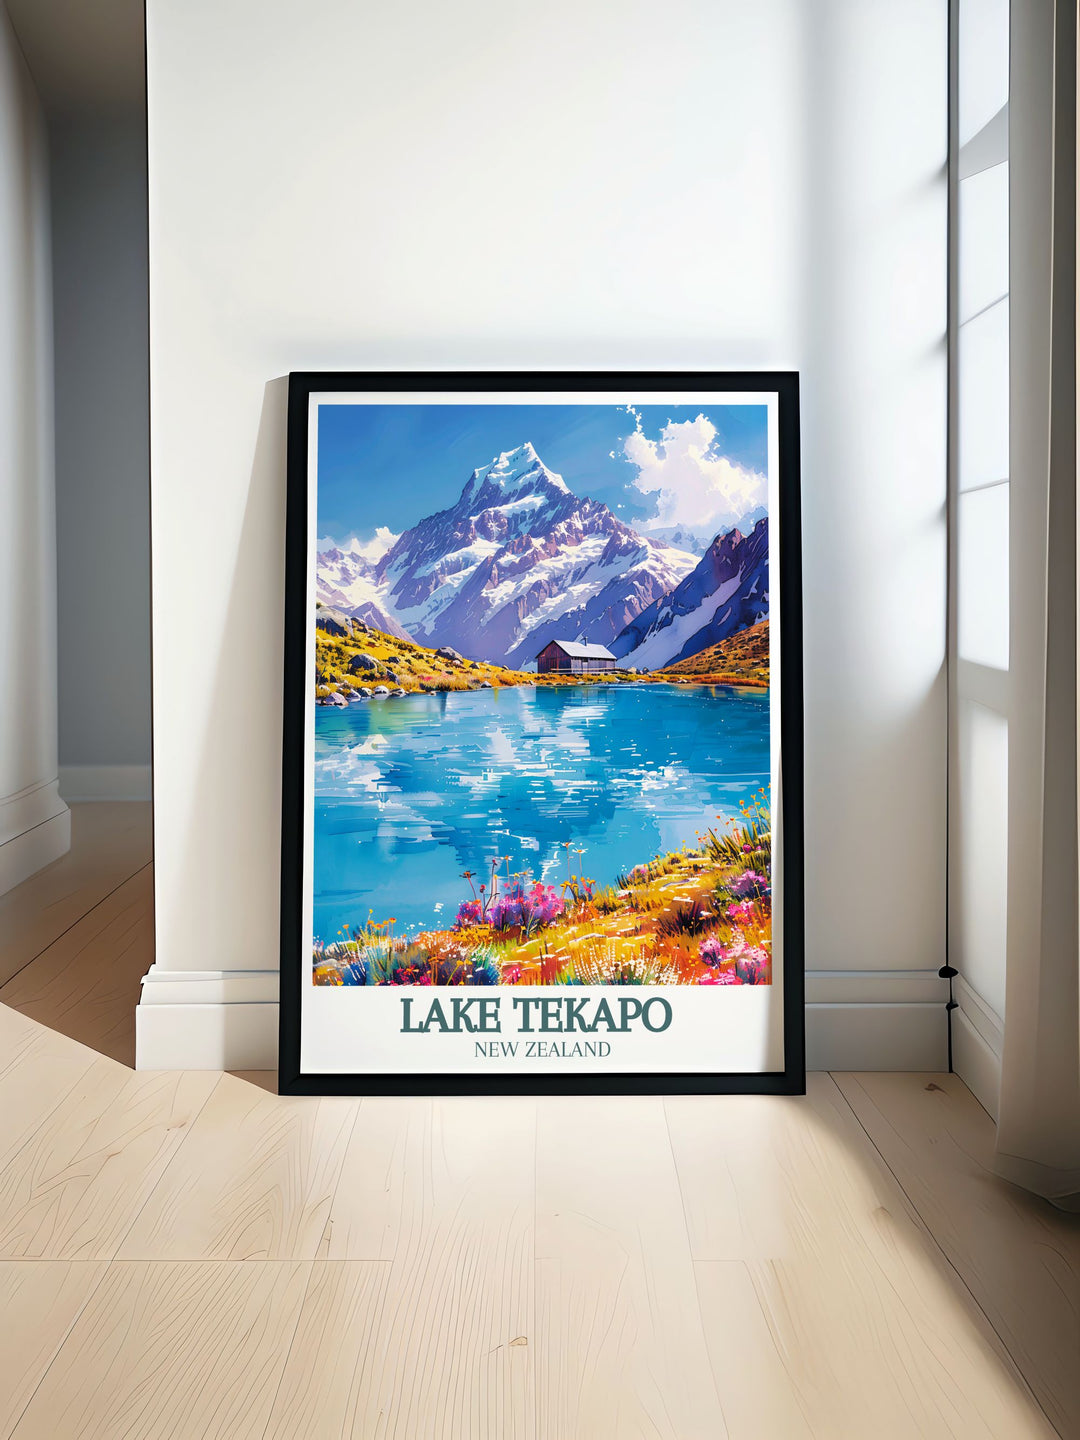 Highlighting the majestic Southern Alps, this travel poster captures the snow capped peaks and lush valleys of this iconic mountain range. Perfect for those who love outdoor adventures and scenic landscapes.